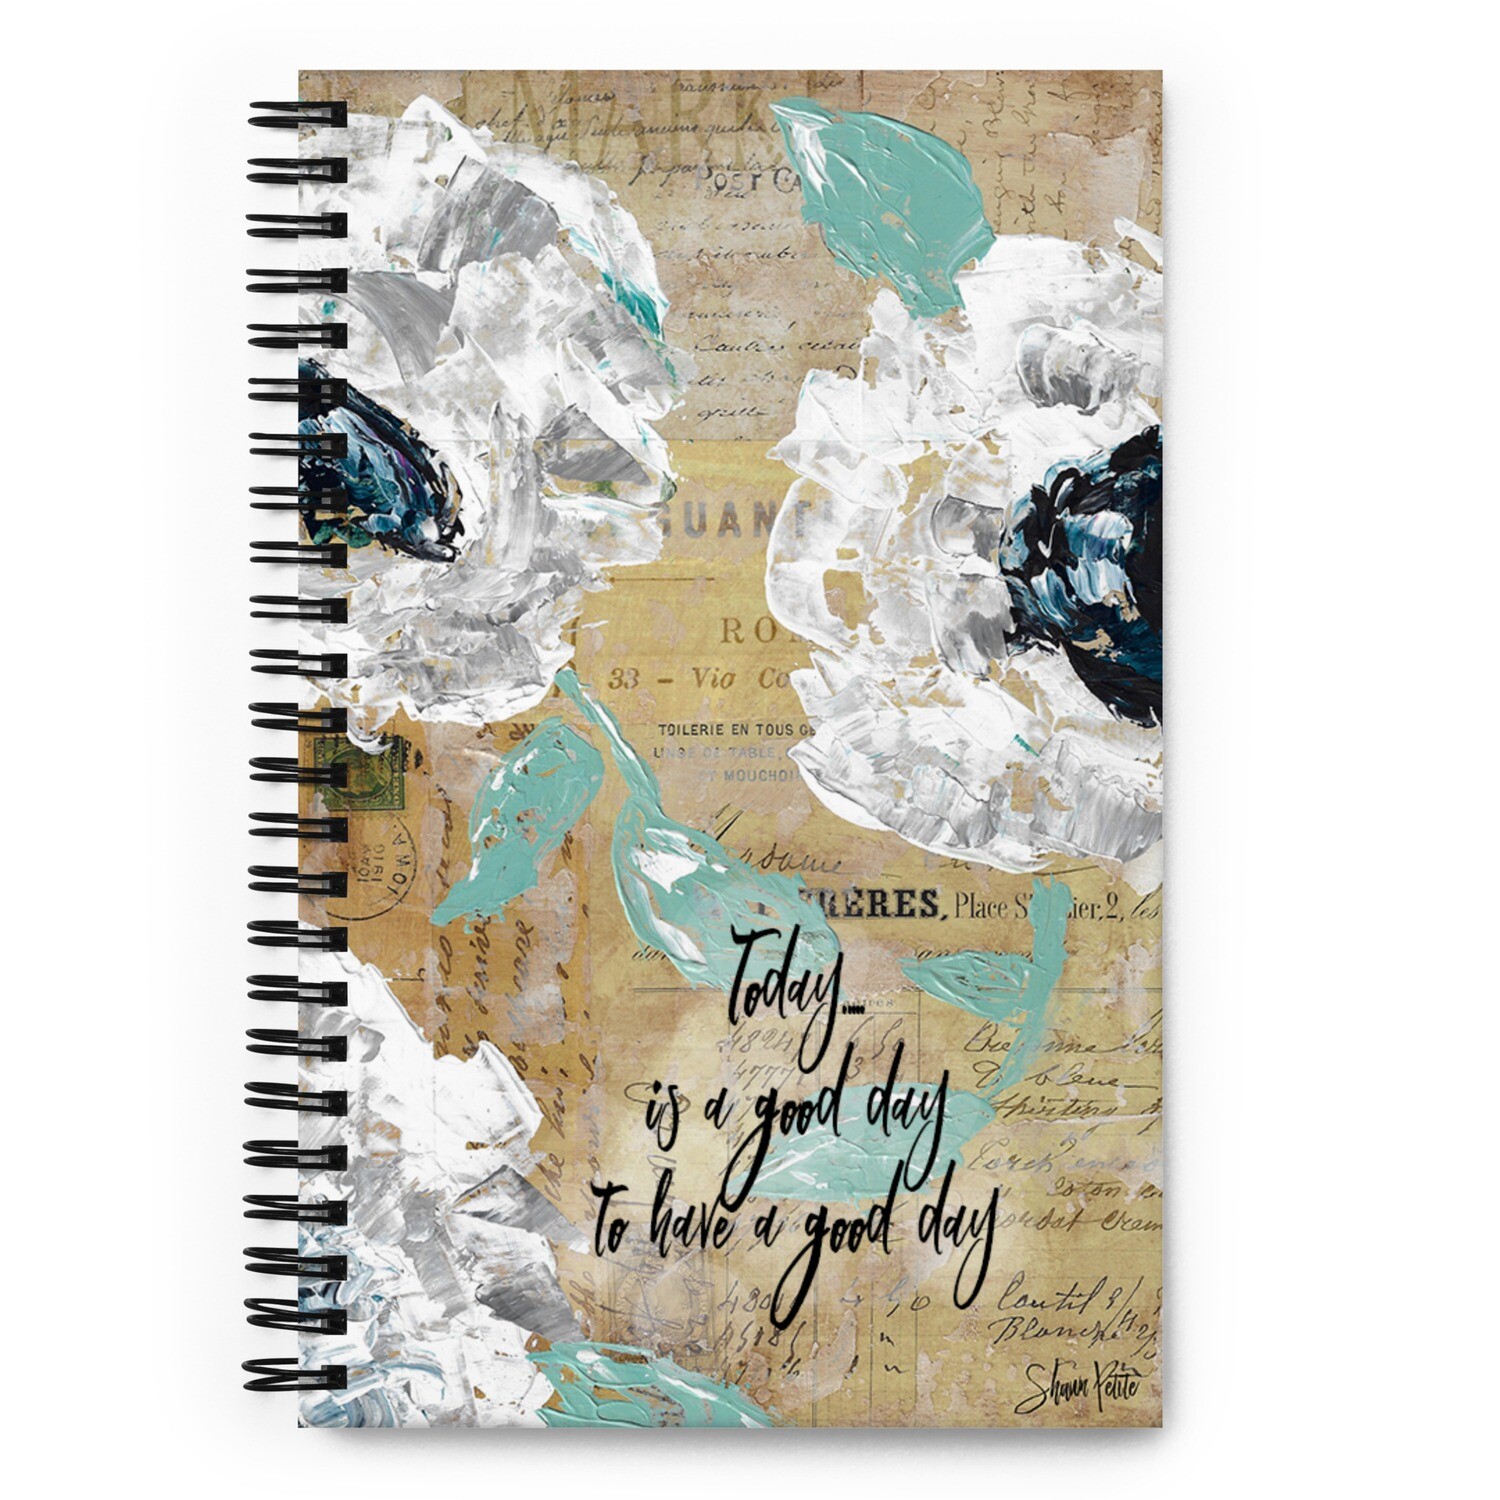 "Today is a good day to have a good day", Spiral notebook with dotted pages